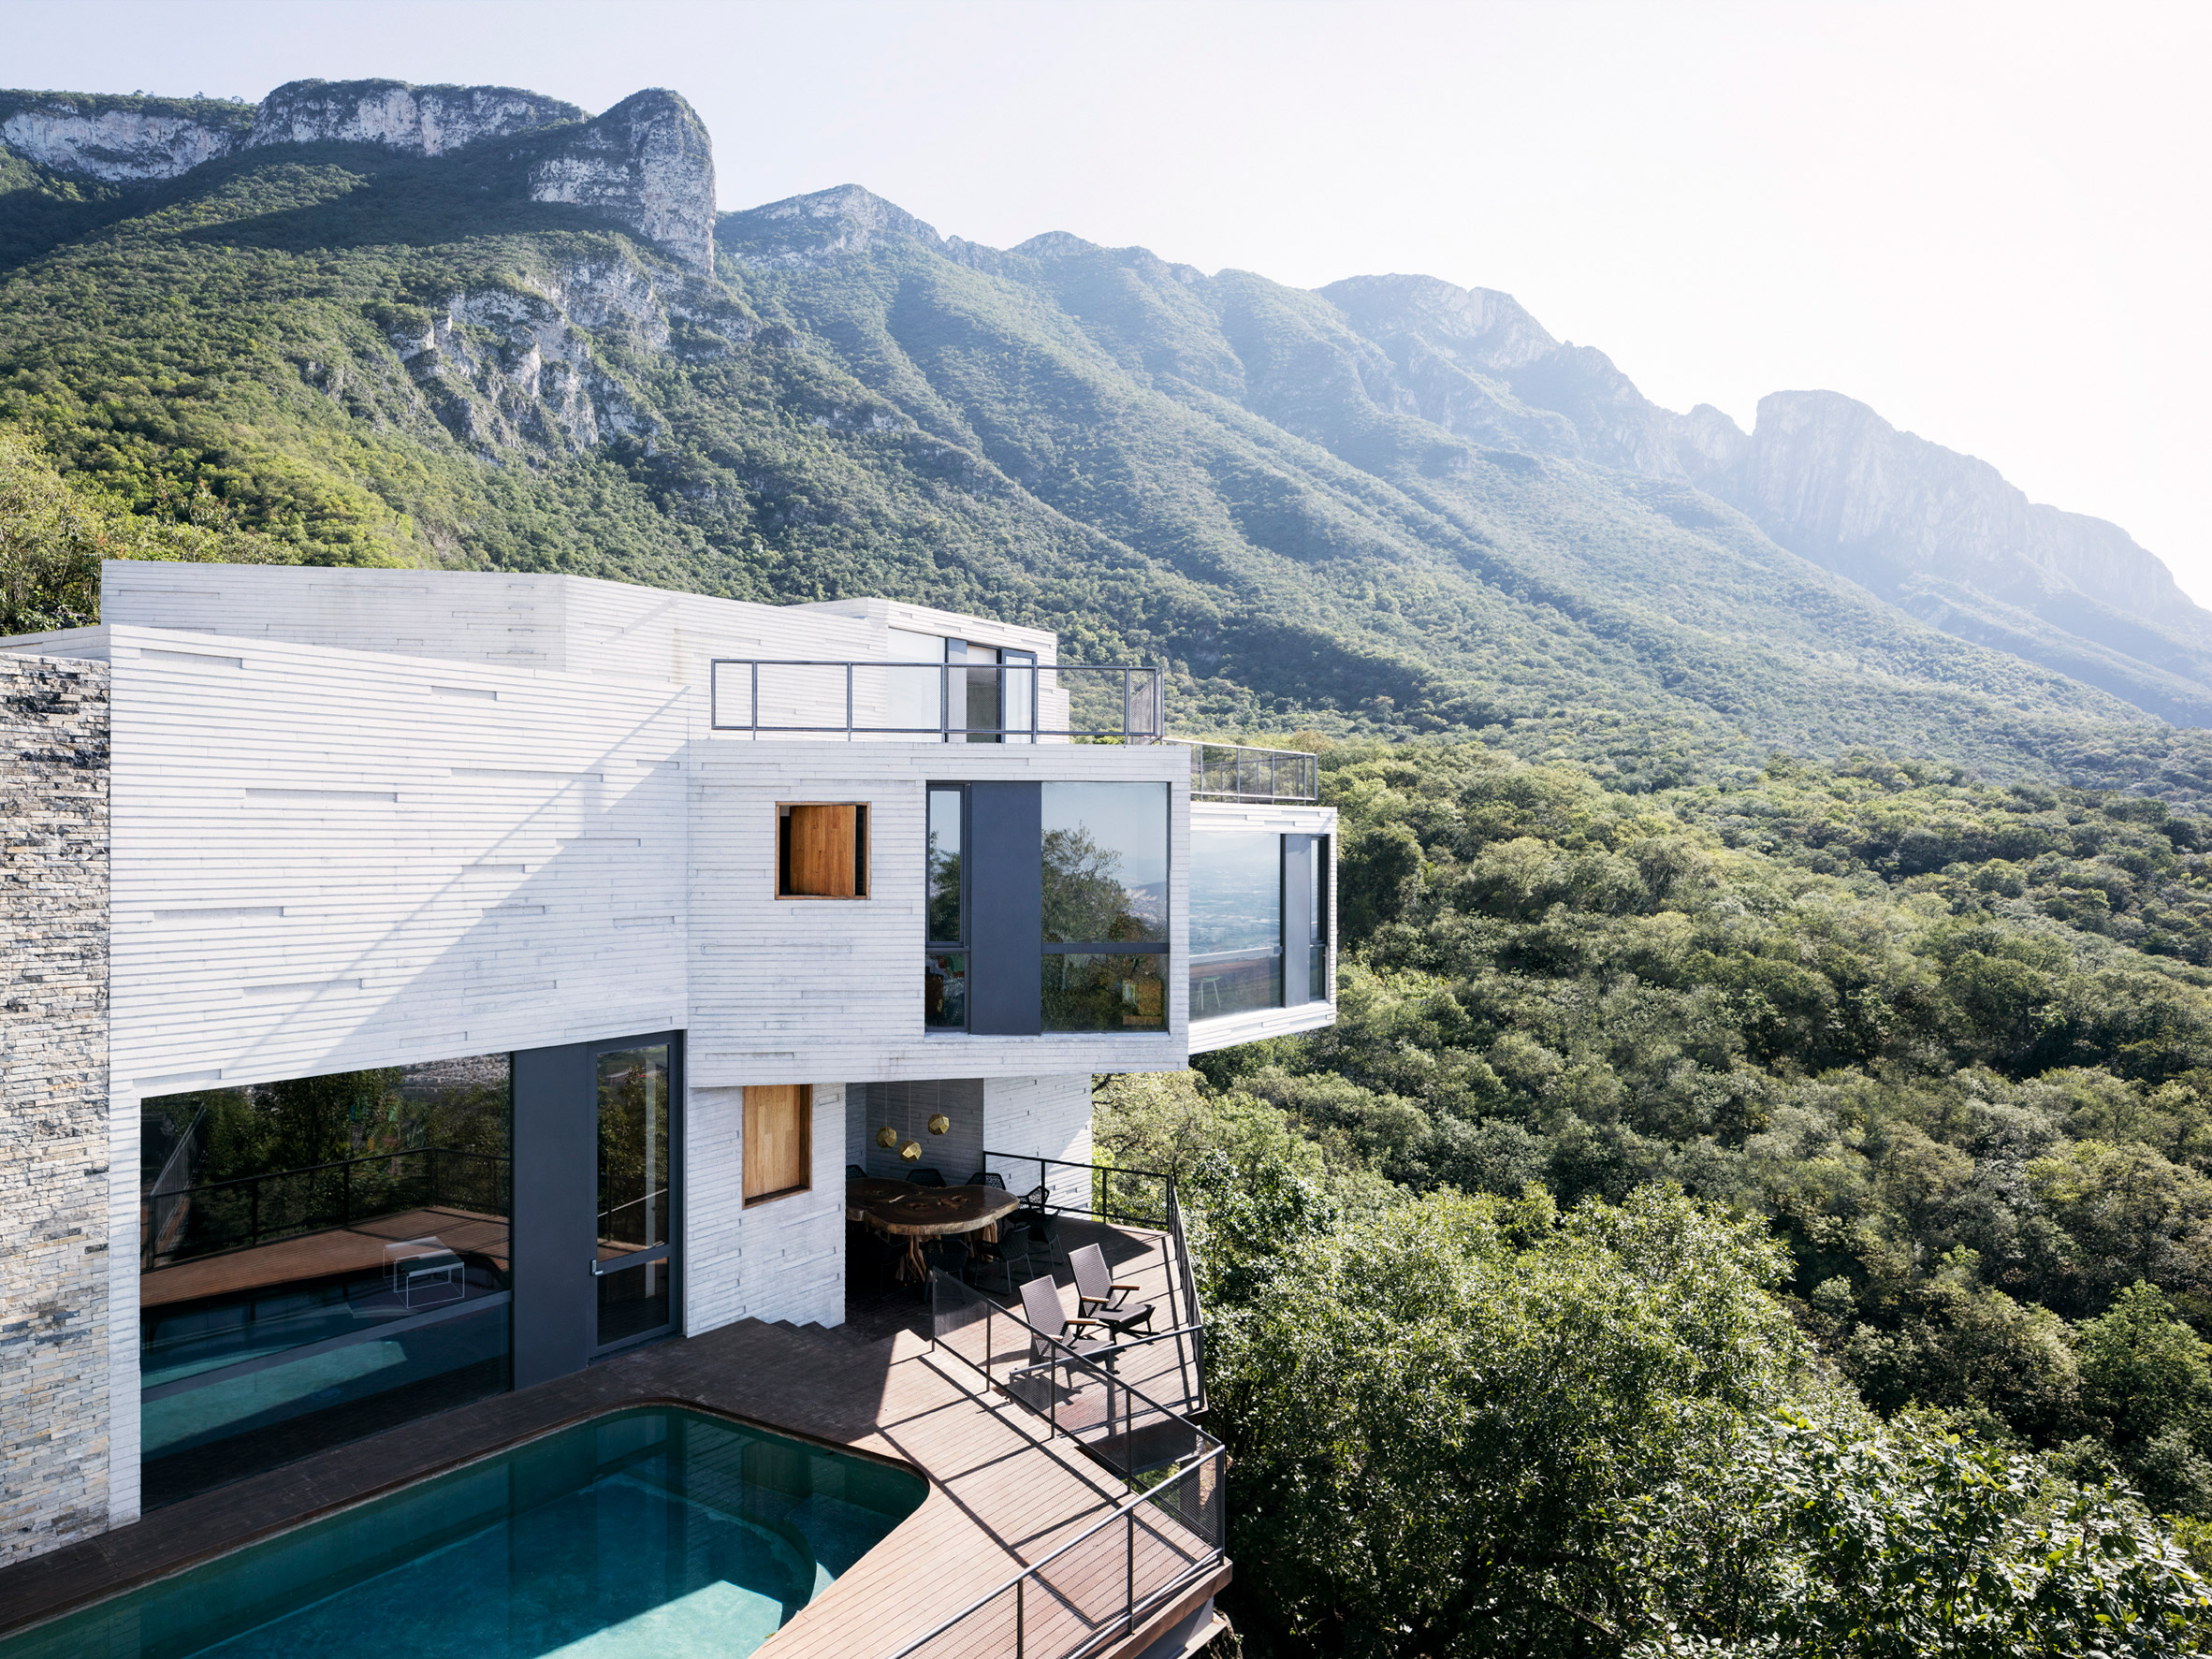 Casa Ventura outdoor area with swimming pool and cantilevered structures set against the surrounding landscape